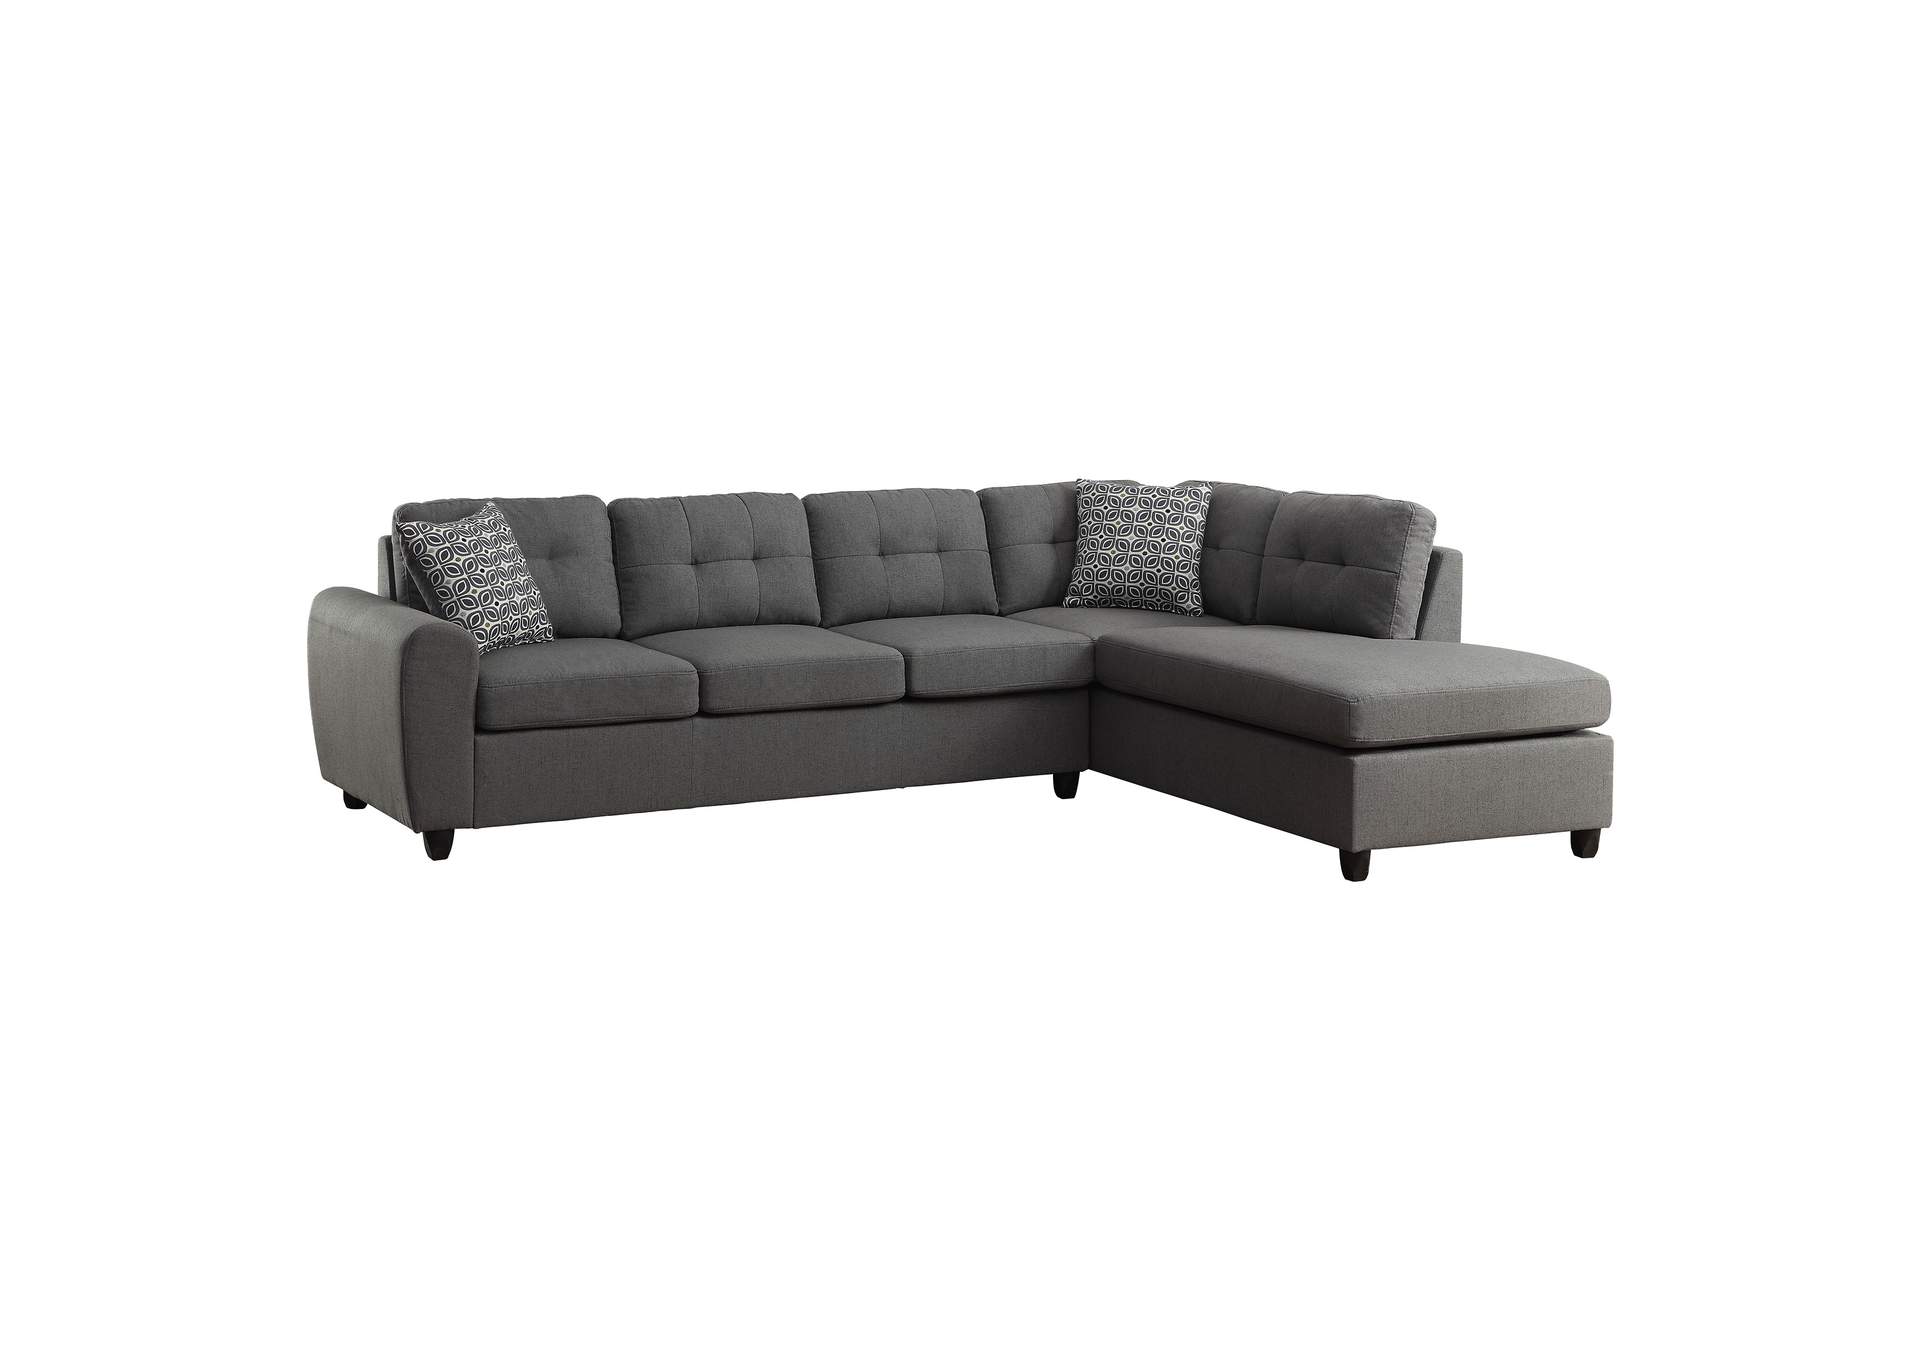 Stonenesse Upholstered Tufted Sectional with Storage Ottoman Grey,Coaster Furniture